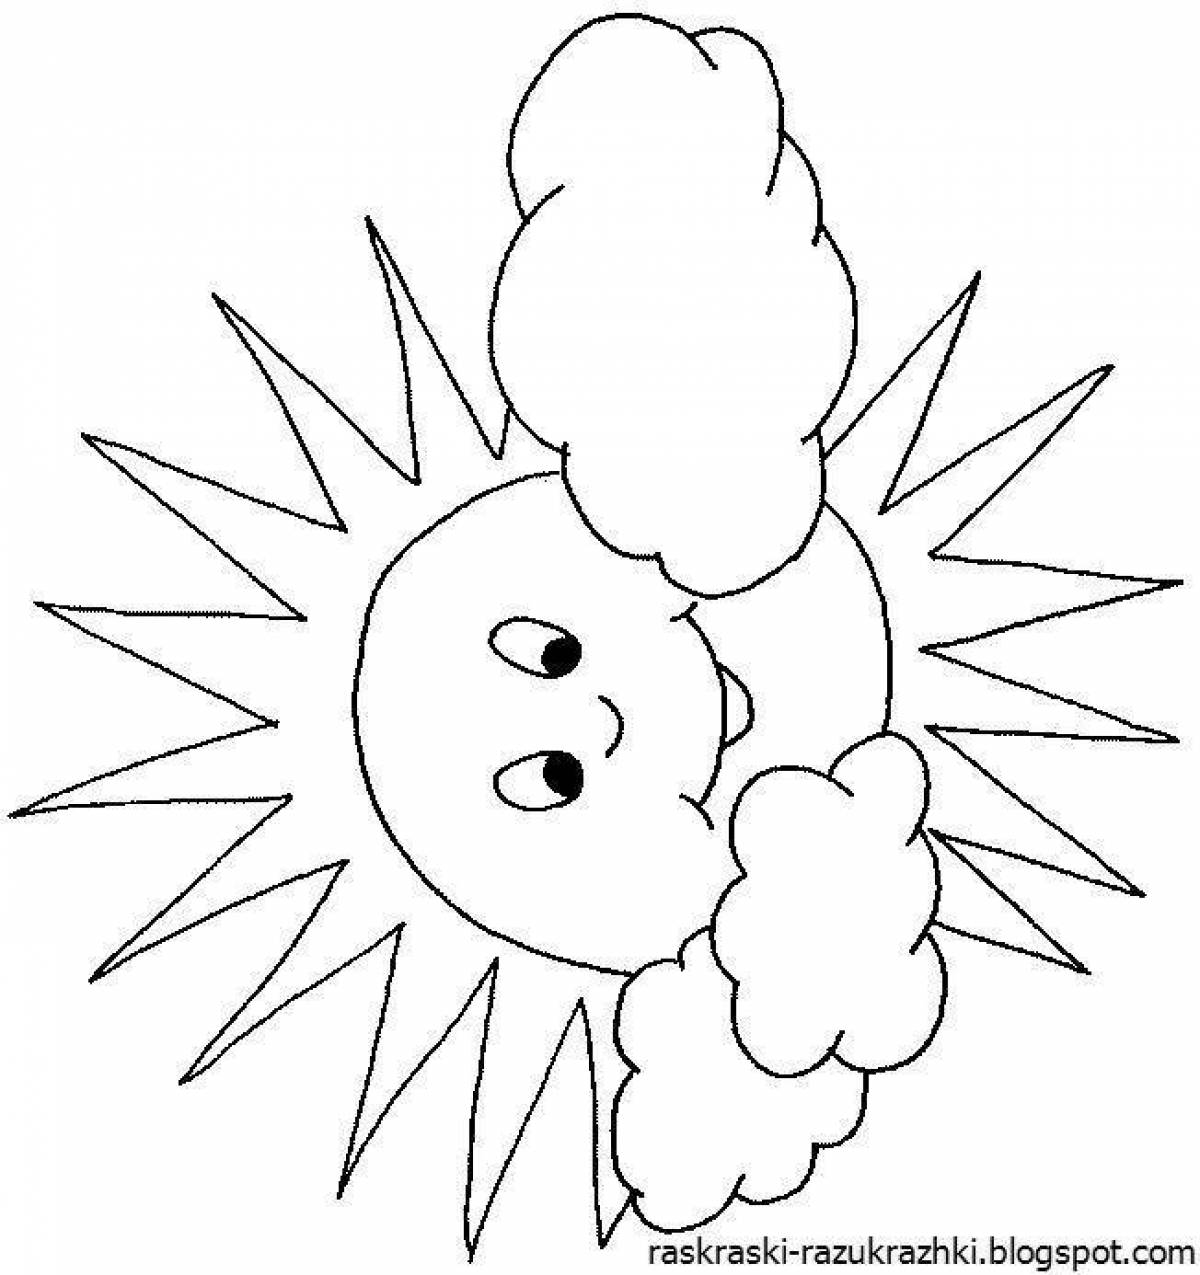 Creative sun coloring book for 2-3 year olds